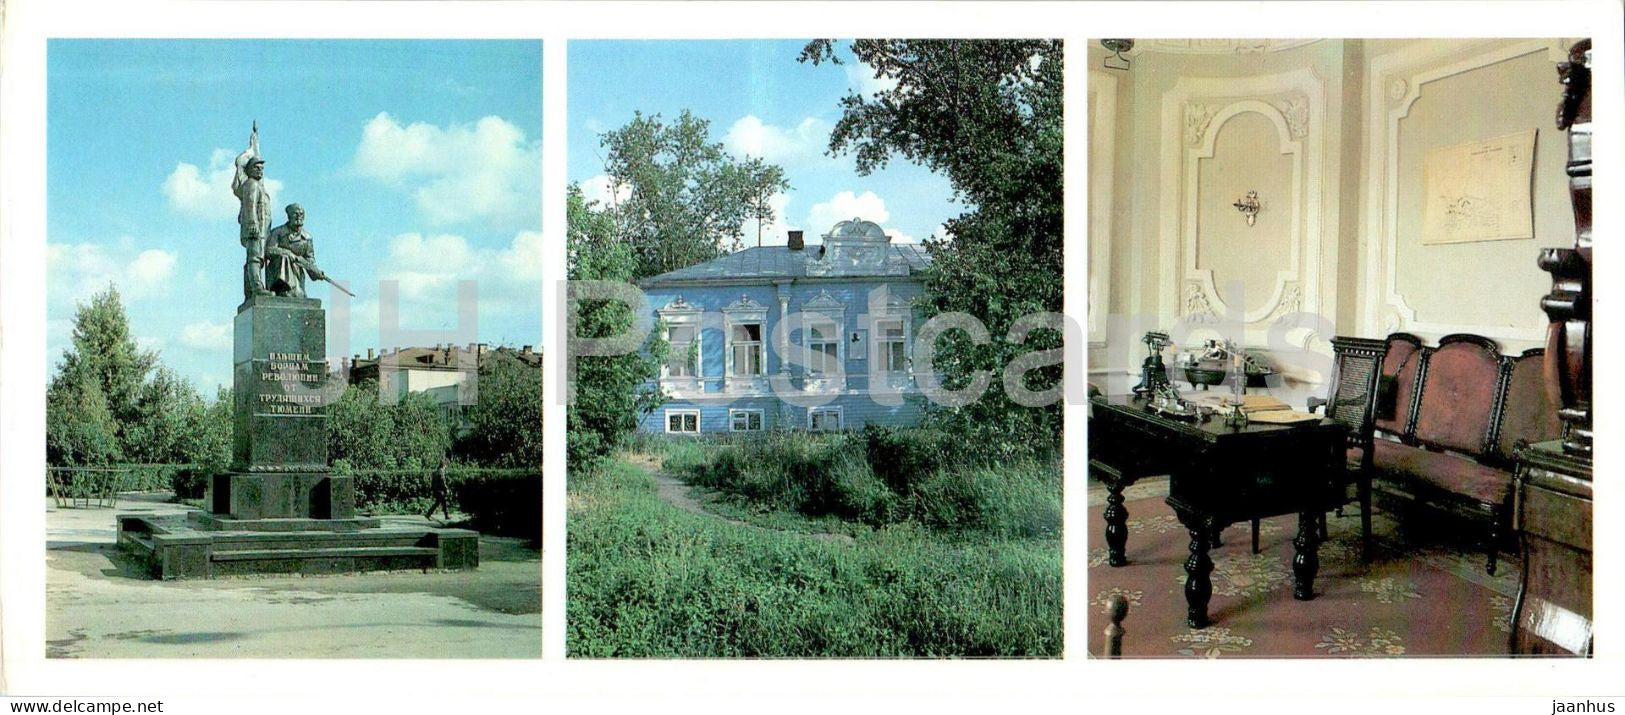 Tyumen - monument to the fallen fighters of the revolution - Blyucher house museum - 1986 - Russia USSR - unused - JH Postcards